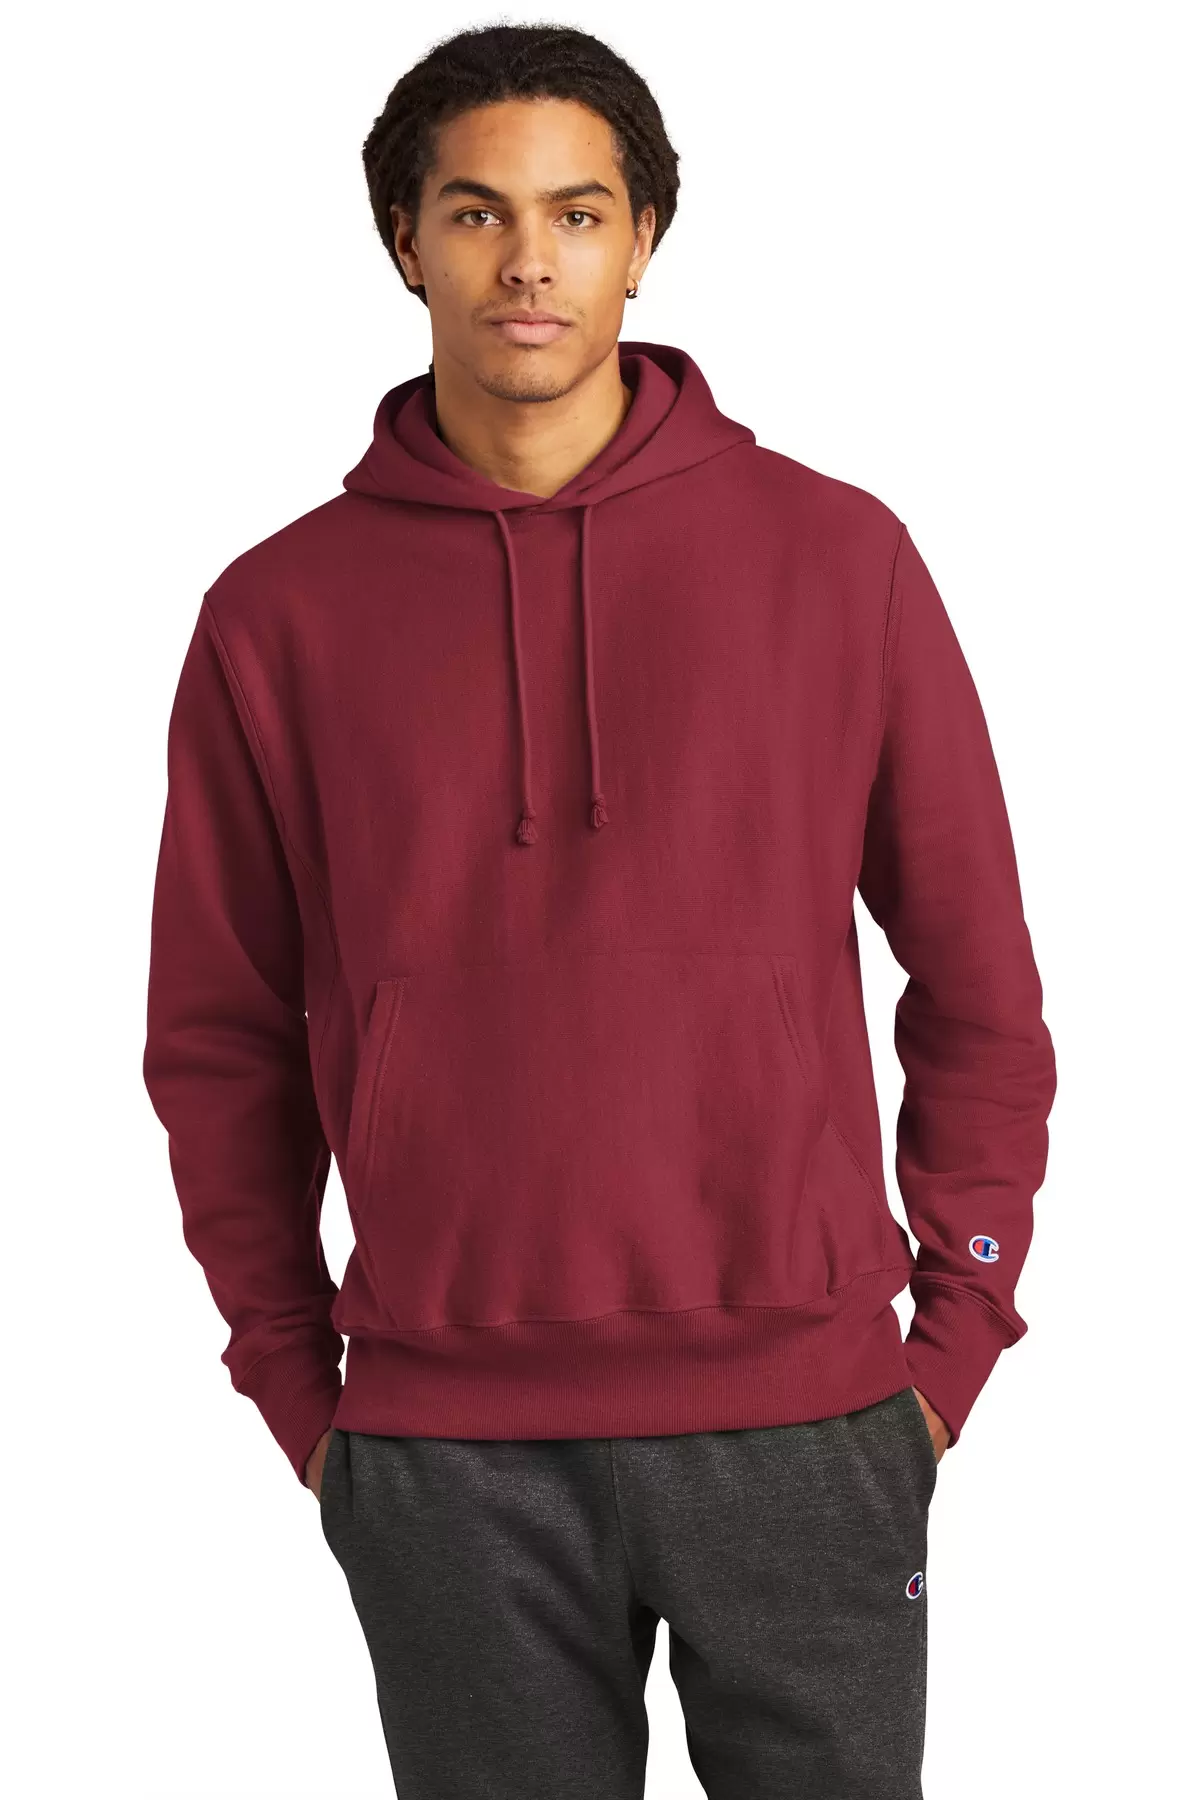 Champion S1051 Reverse Weave Hoodie - From $30.03